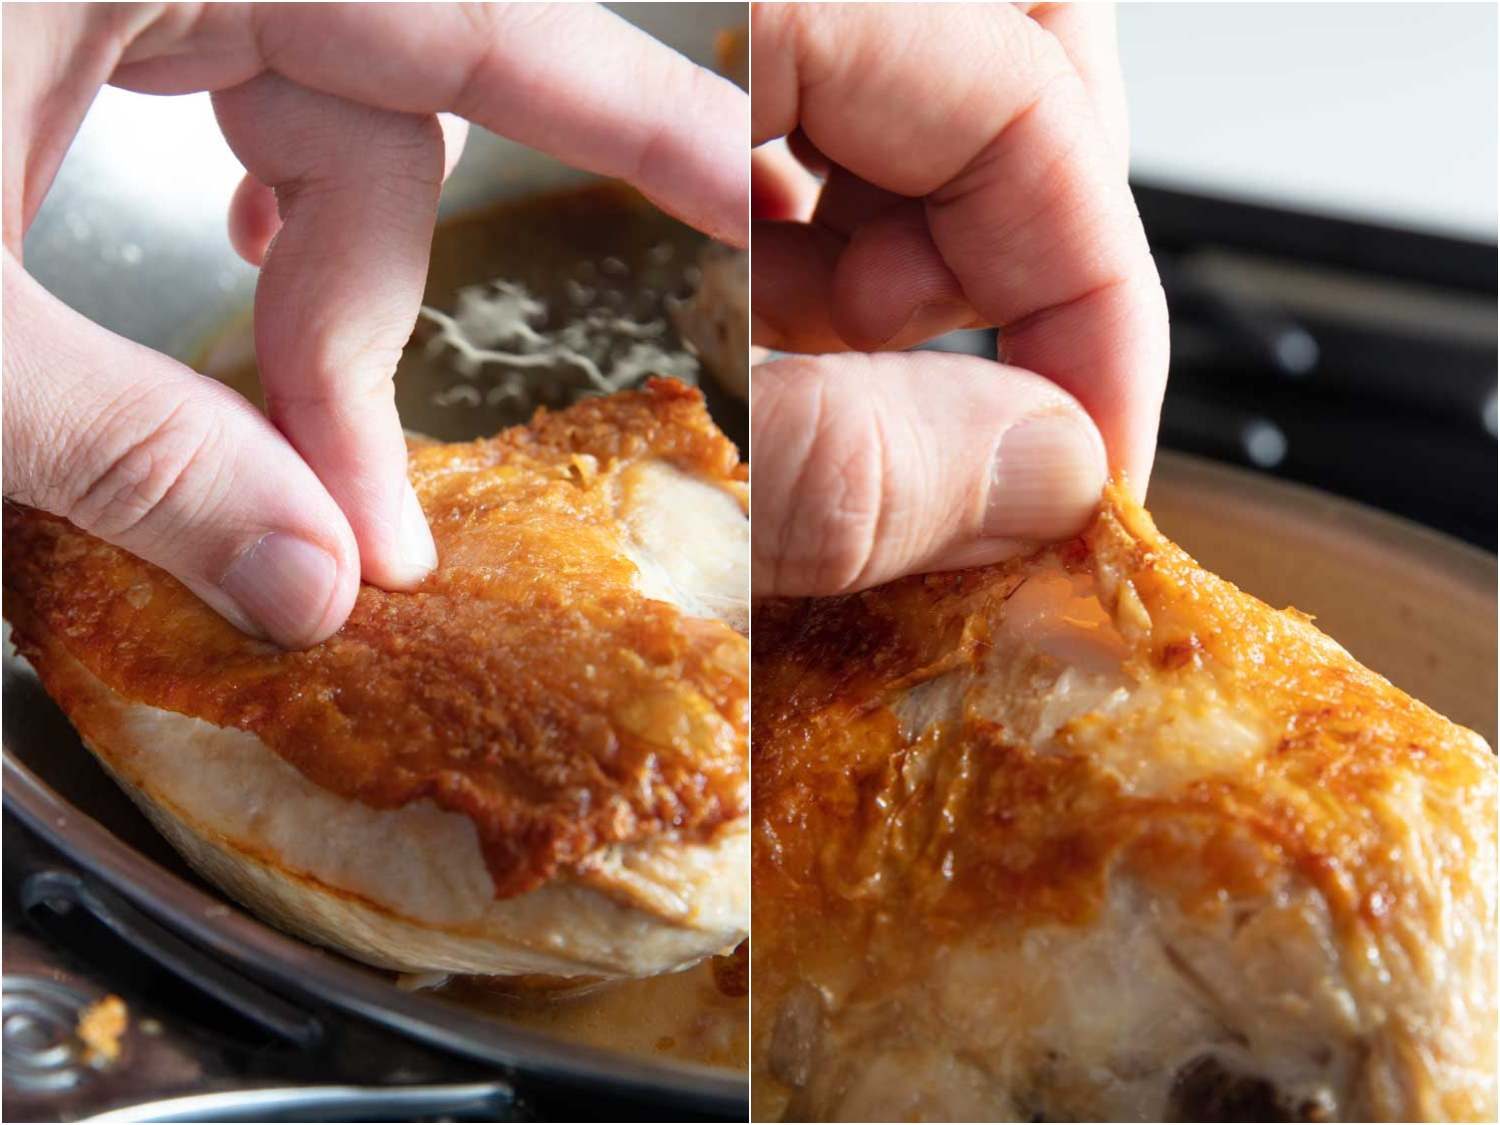 A side-by-side image showing how crisp the skin is on chicken cooked in a stainless steel skillet versus a nonstick one. The skin on from the nonstick skillet bird is easier to pinch because it's less crispy in many areas.